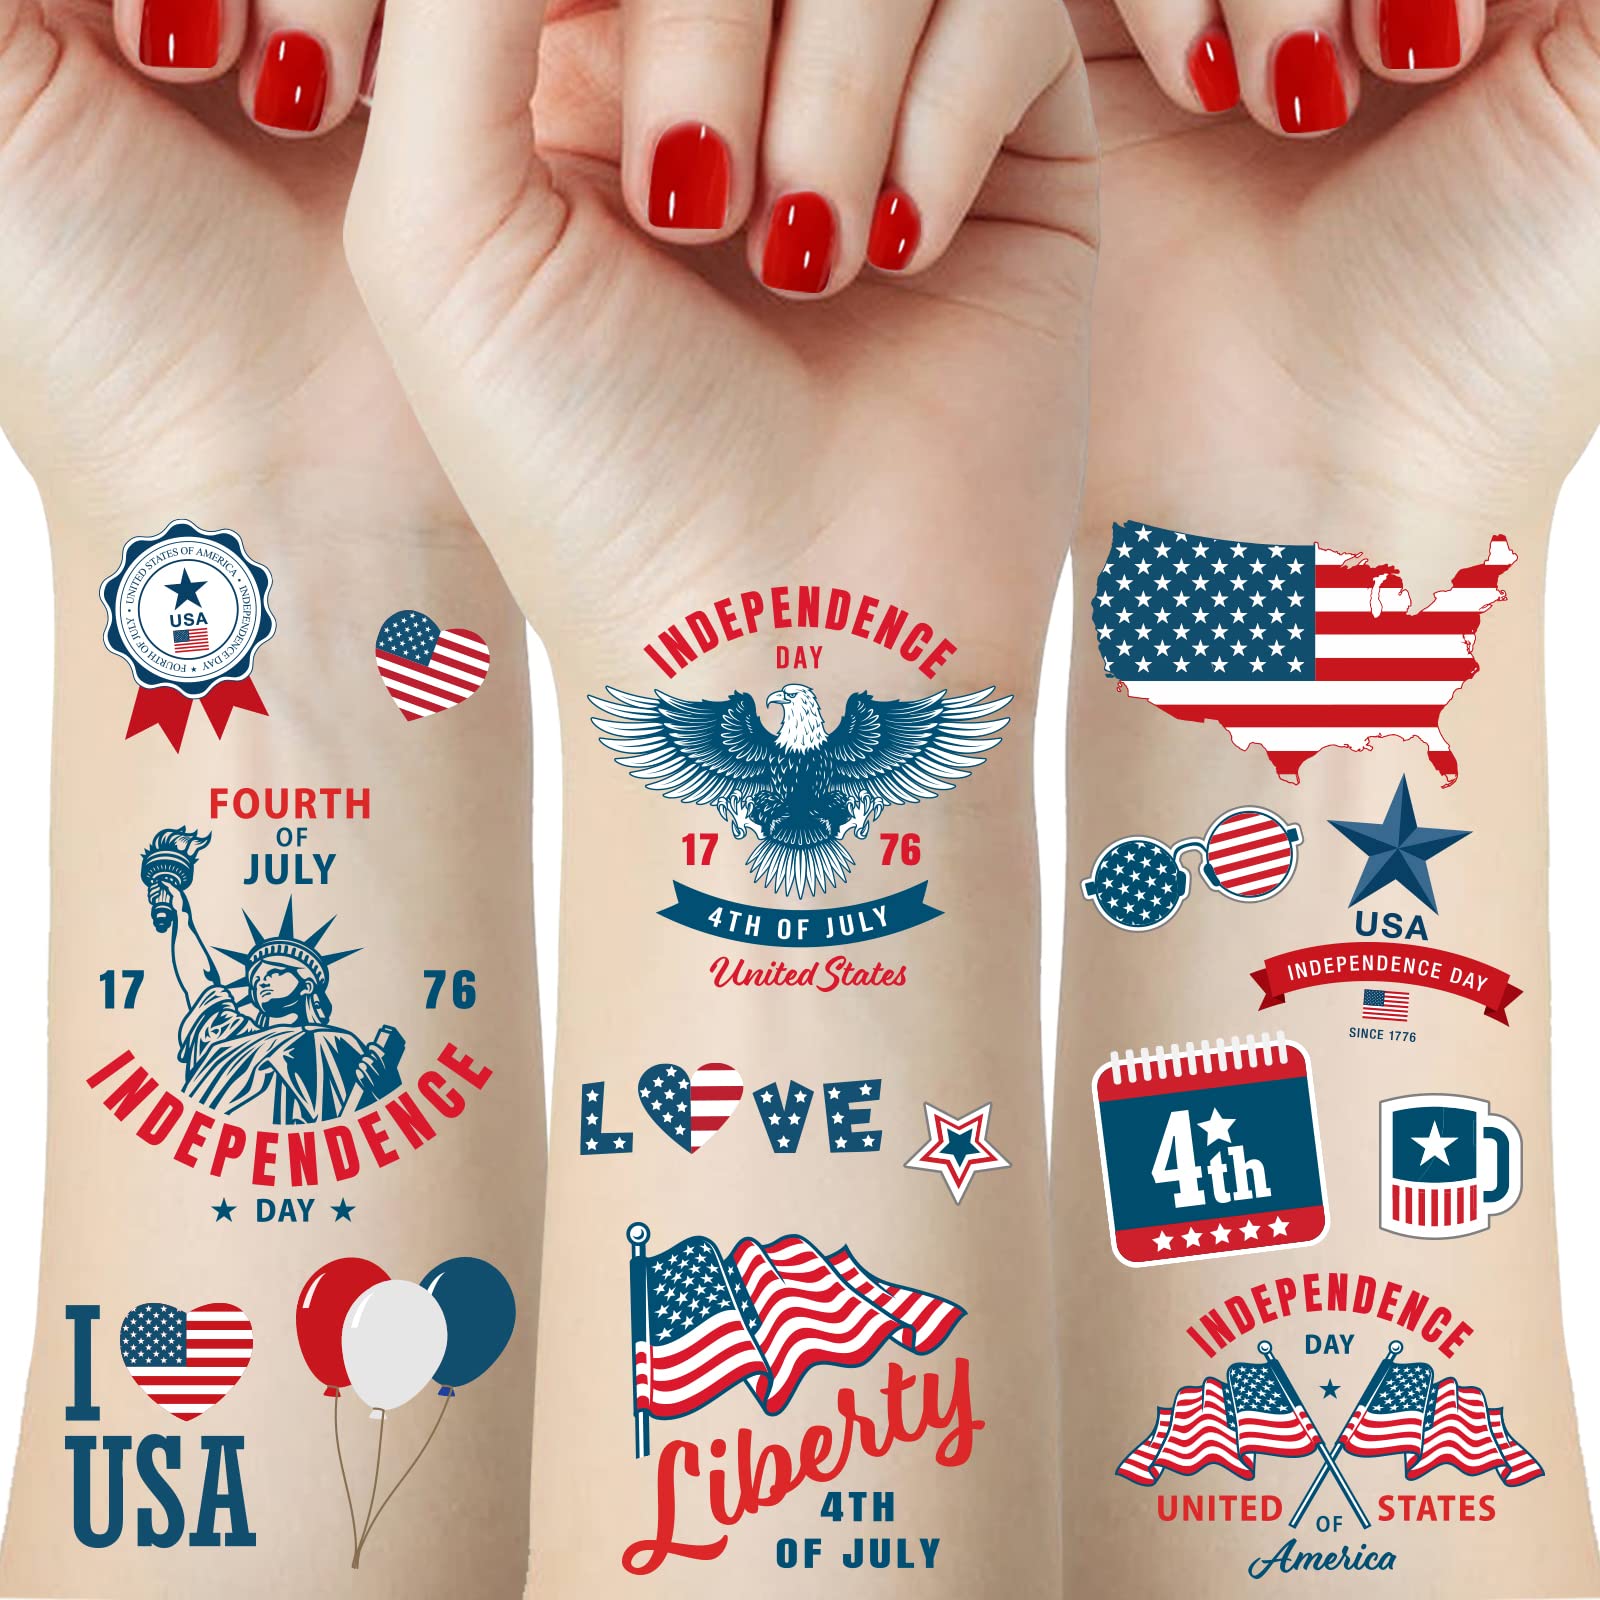 Buy USA Flag Tattoos Patriotic Stickers Independence Day July 4th Party  Decoration Body Art Fake Temporary Tattoos Decals for Women Men Girls Kids  Face Arm Skin Decor Supplies 31 Patterns Online at